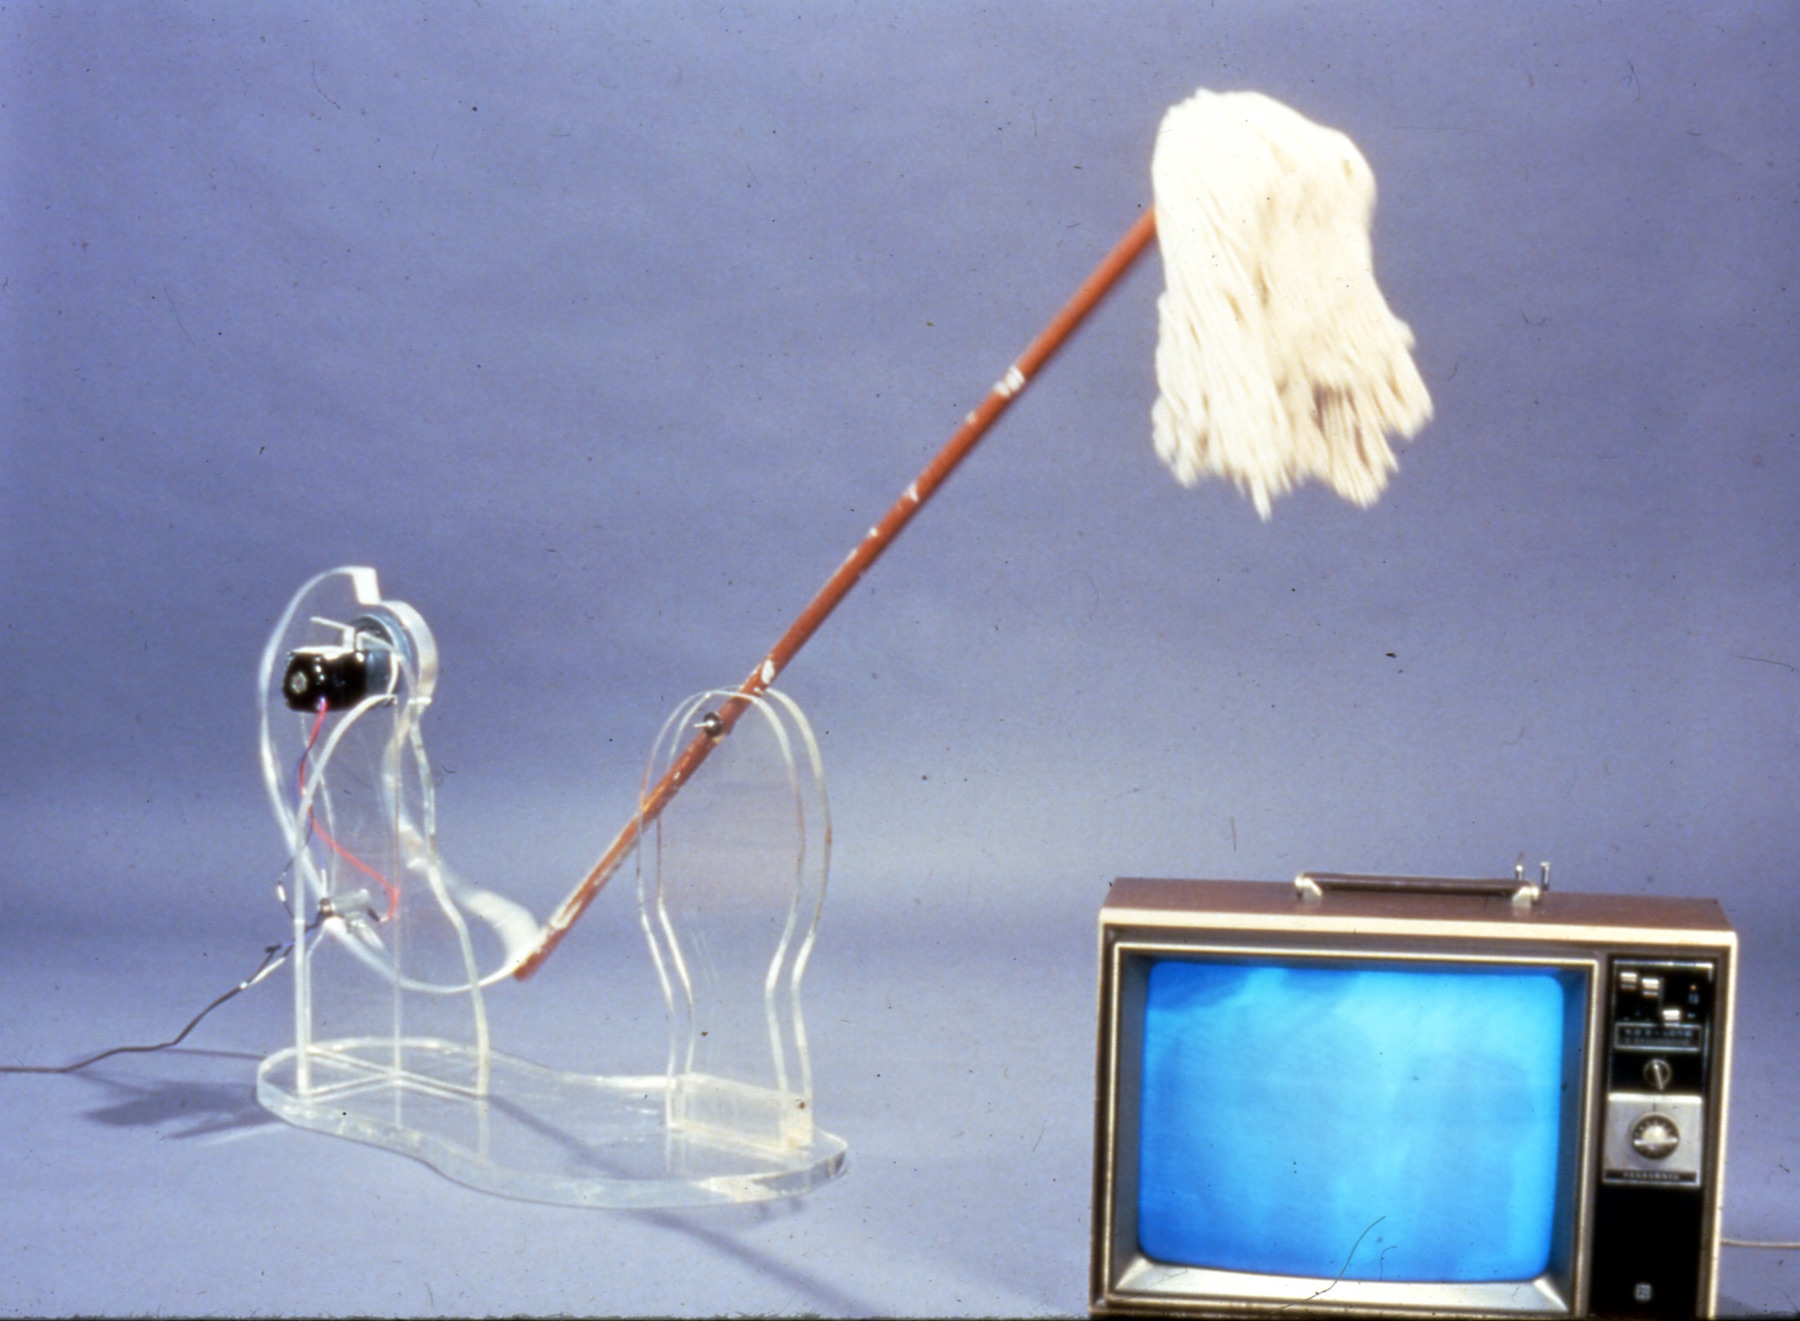 istallation shot of mop with moter repeatedly hitting television